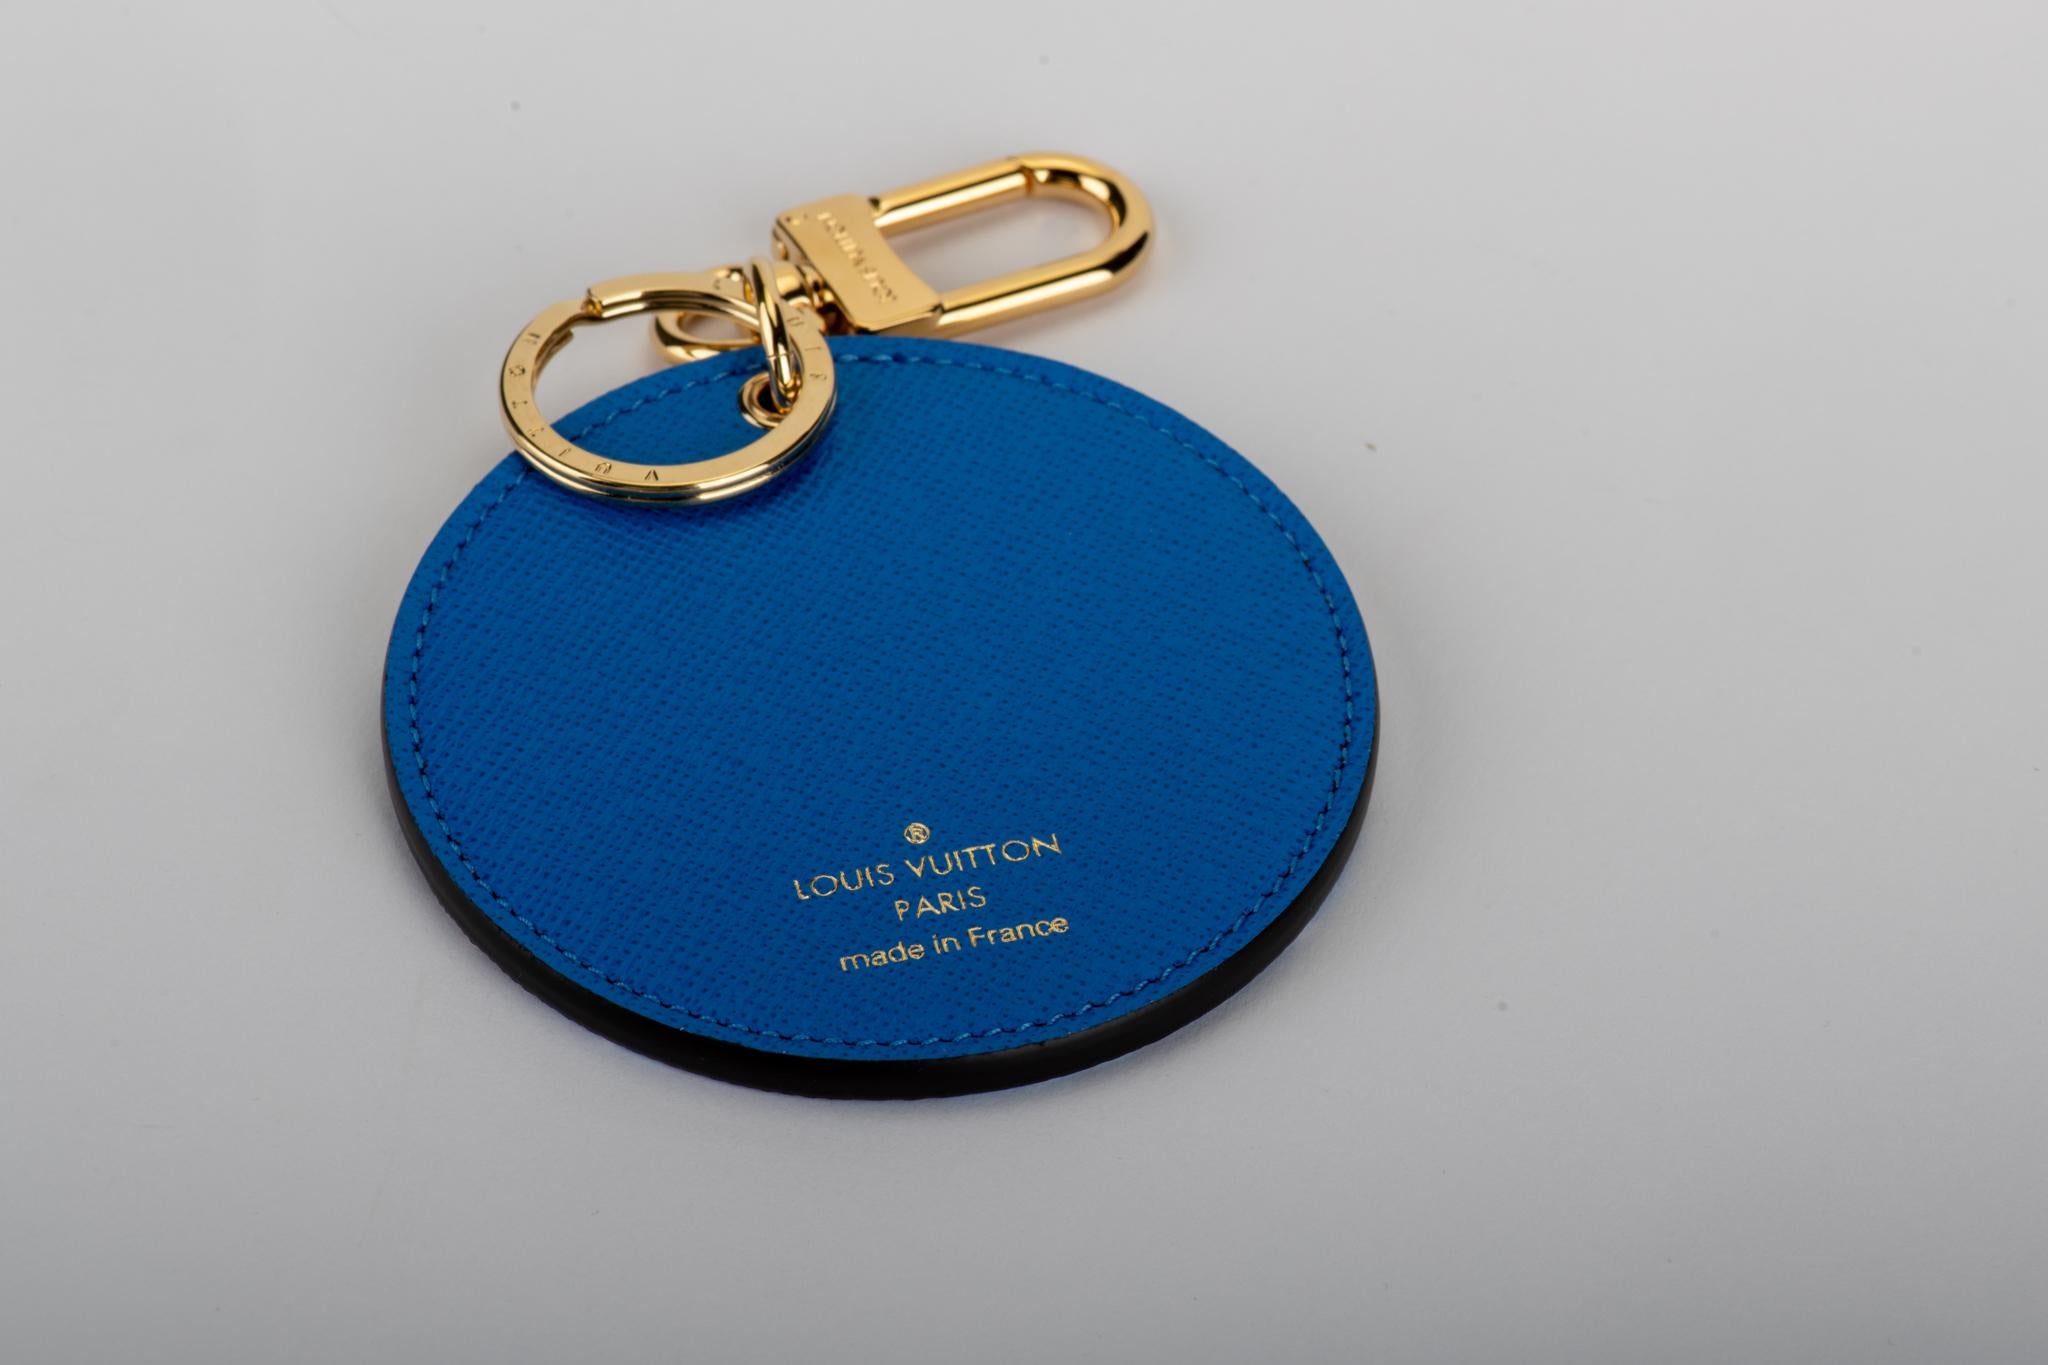 Louis Vuitton Christmas 2019 limited edition keychain/bag charm. Venice design. Brand new in box with dust cover.